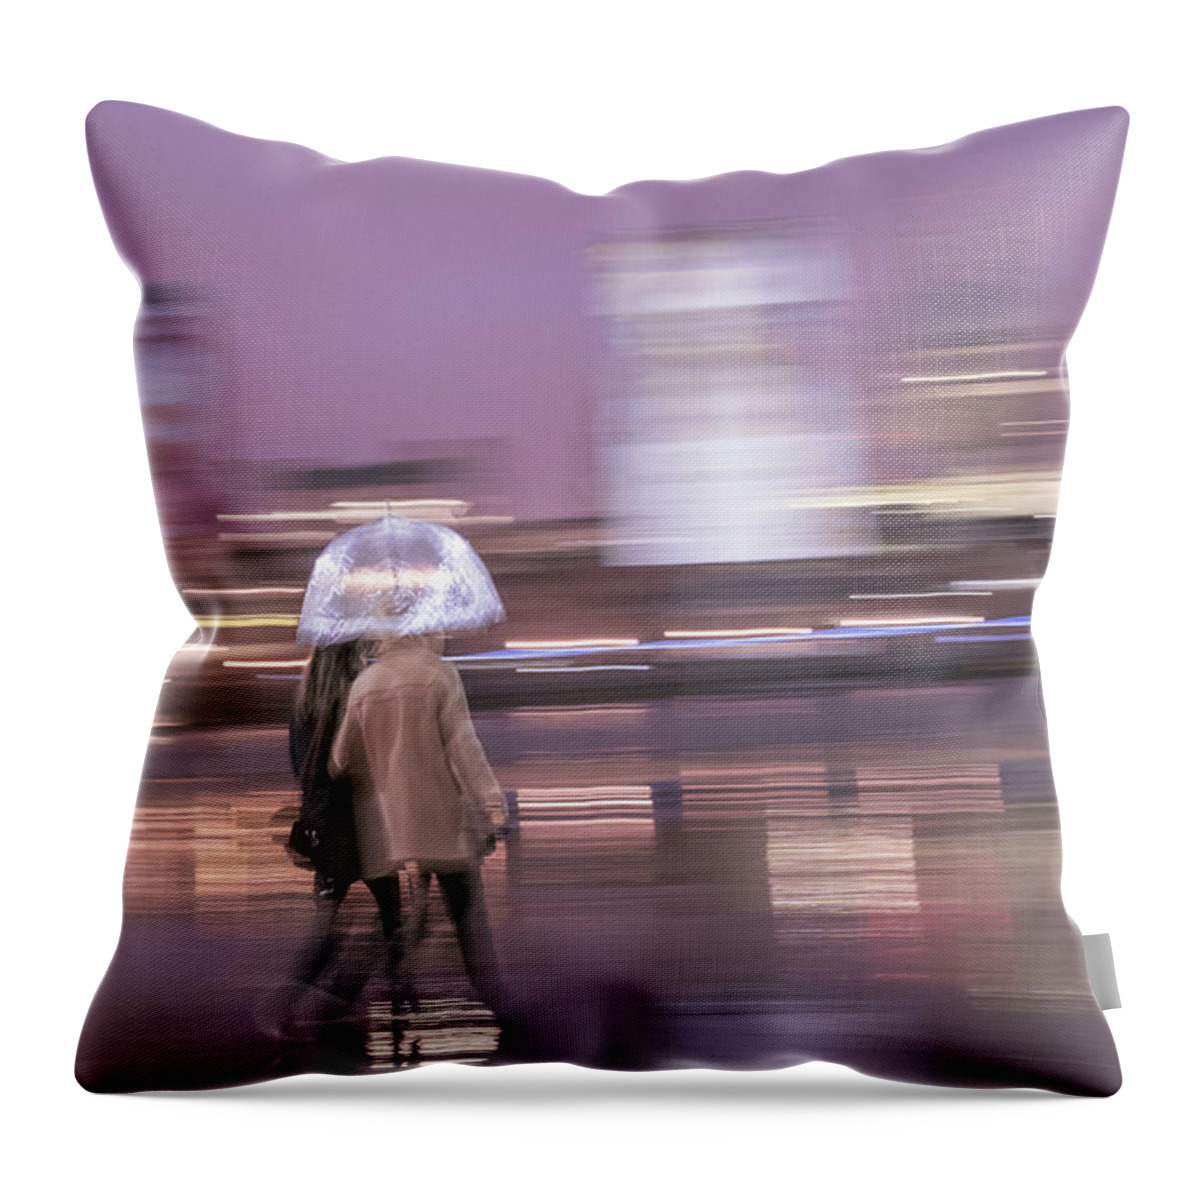 Rain Throw Pillow featuring the photograph Rainy Day Stroll by Linda Villers